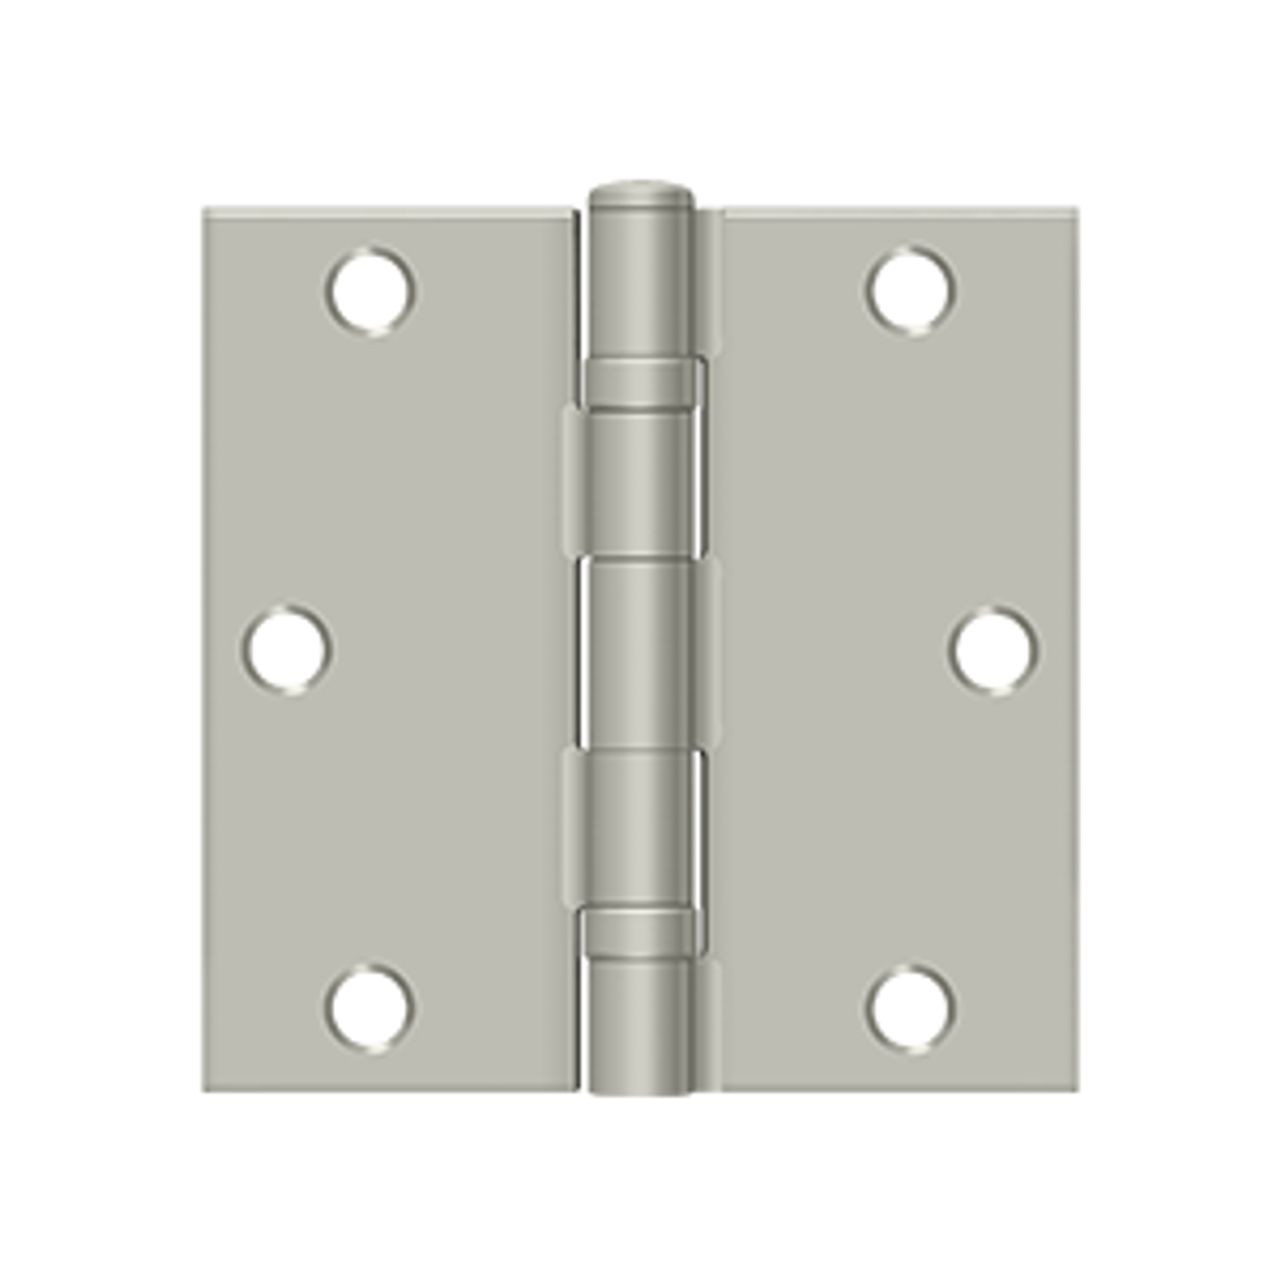 Deltana S35BBR 3-1/2" X 3-1/2" SQUARE HINGE, BALL BEARING STEEL MATERIAL